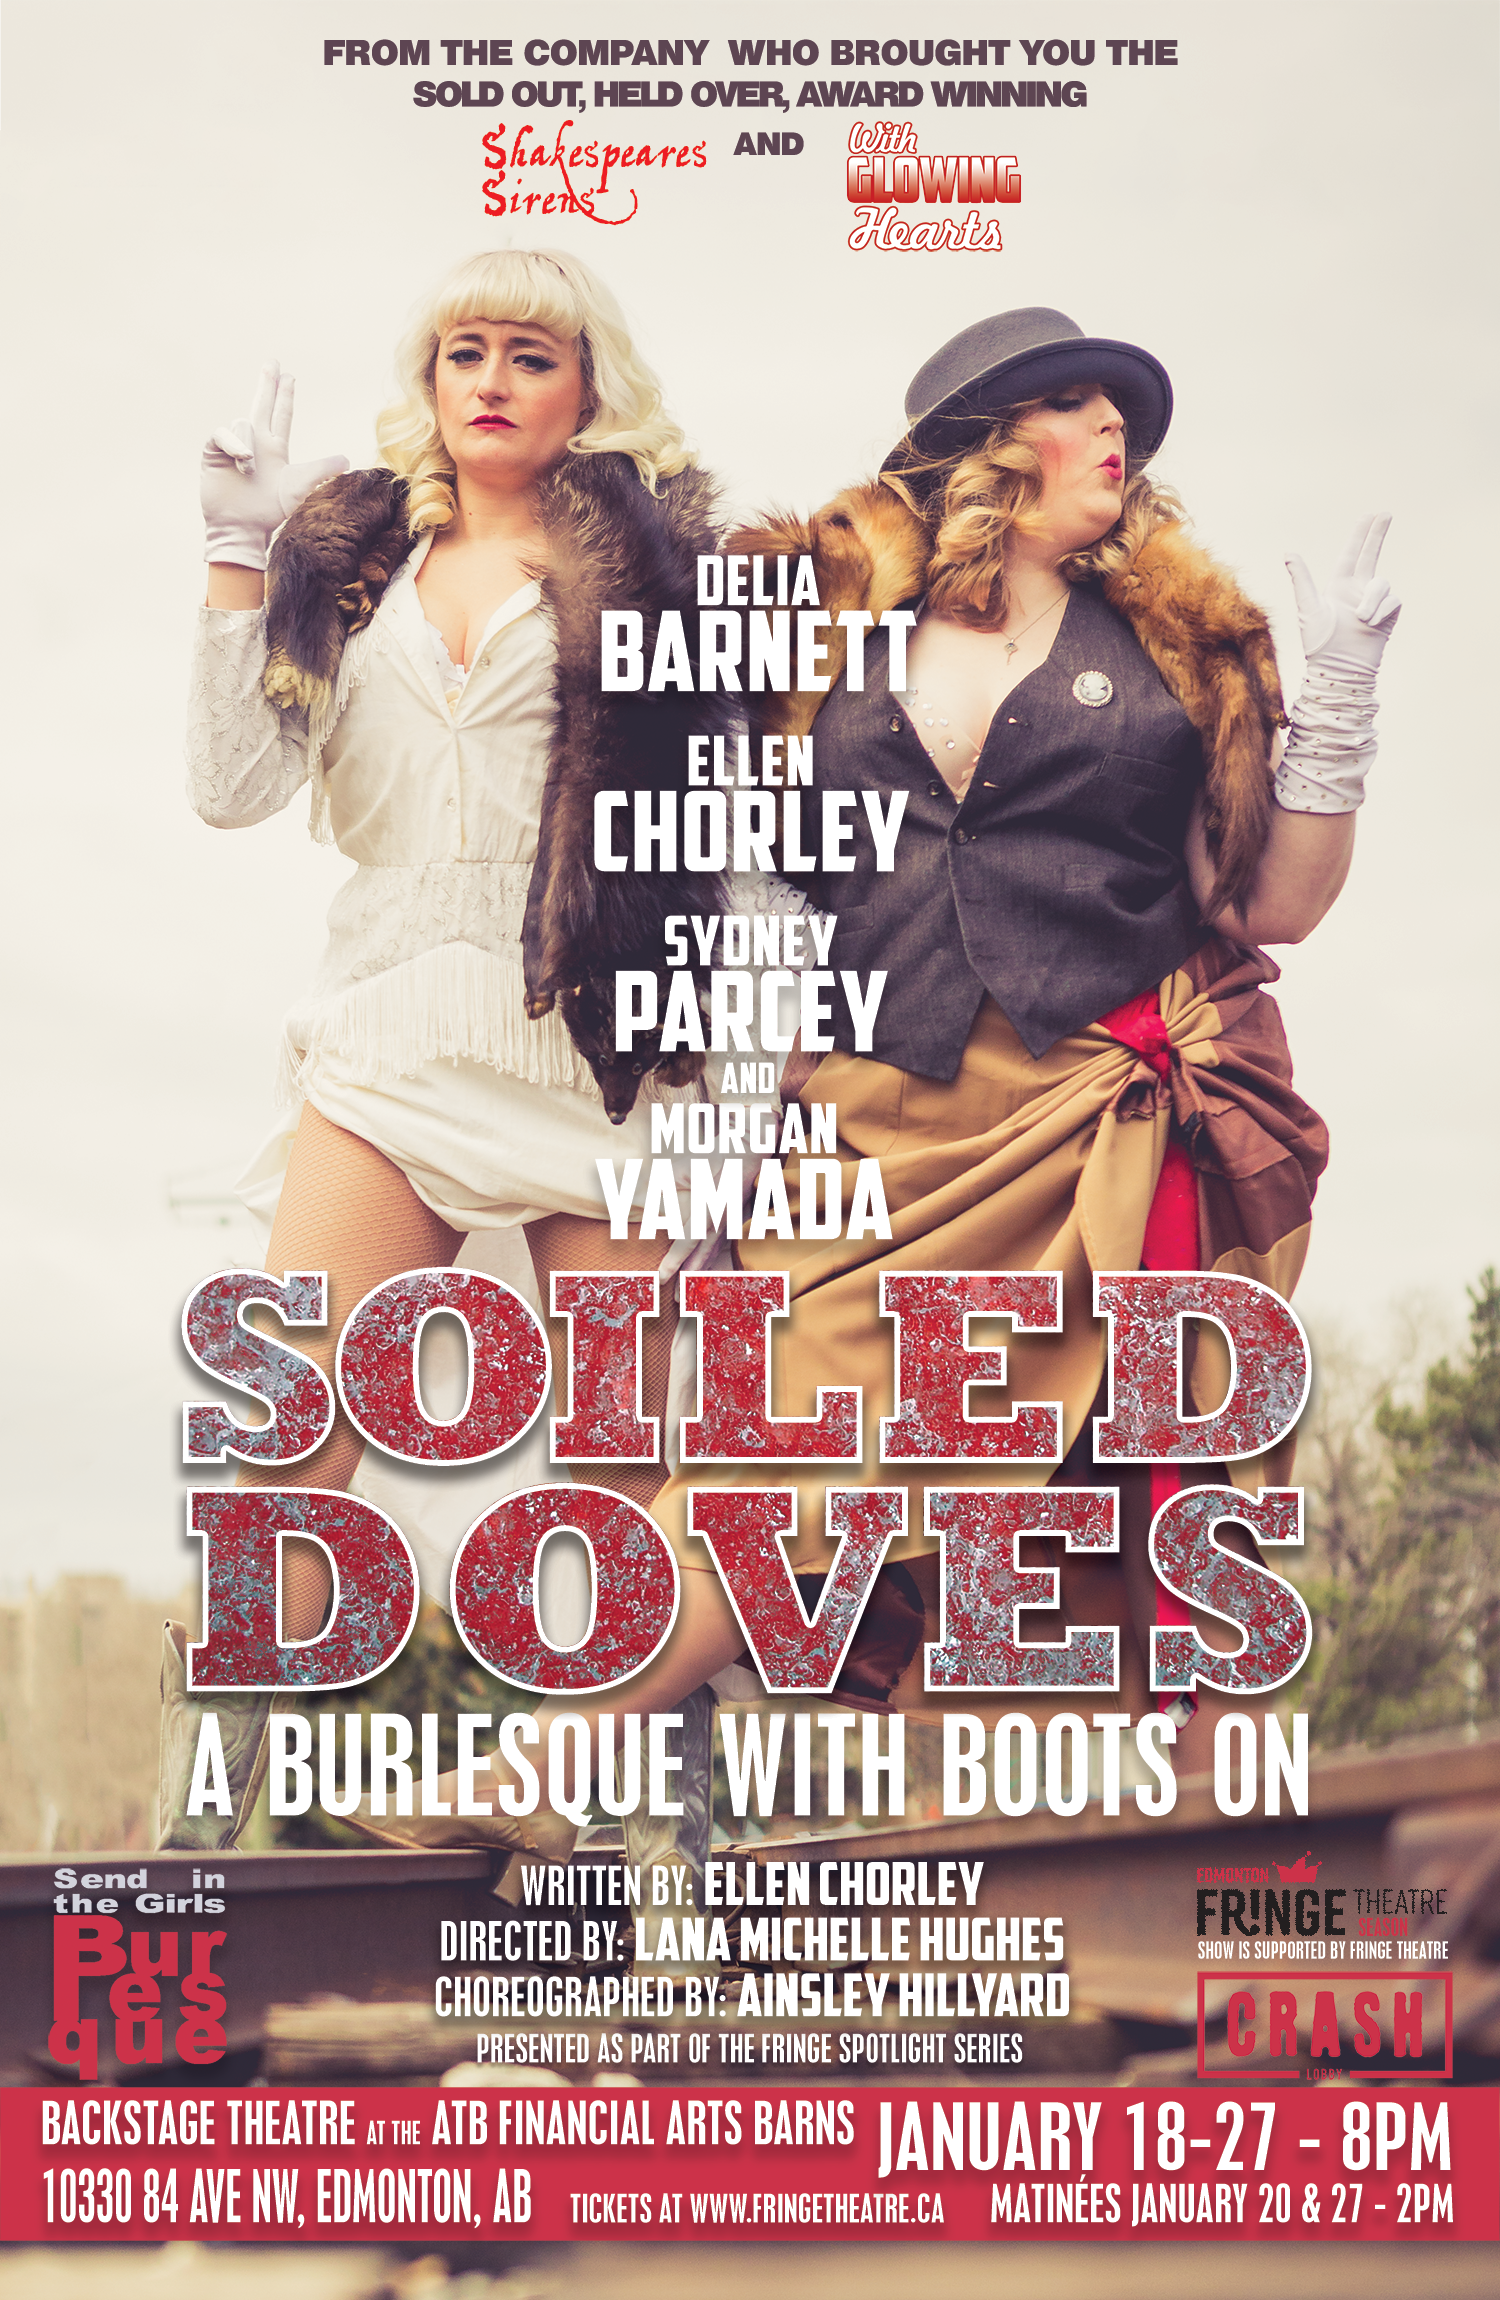 Soiled Doves - Poster - Web 2.png